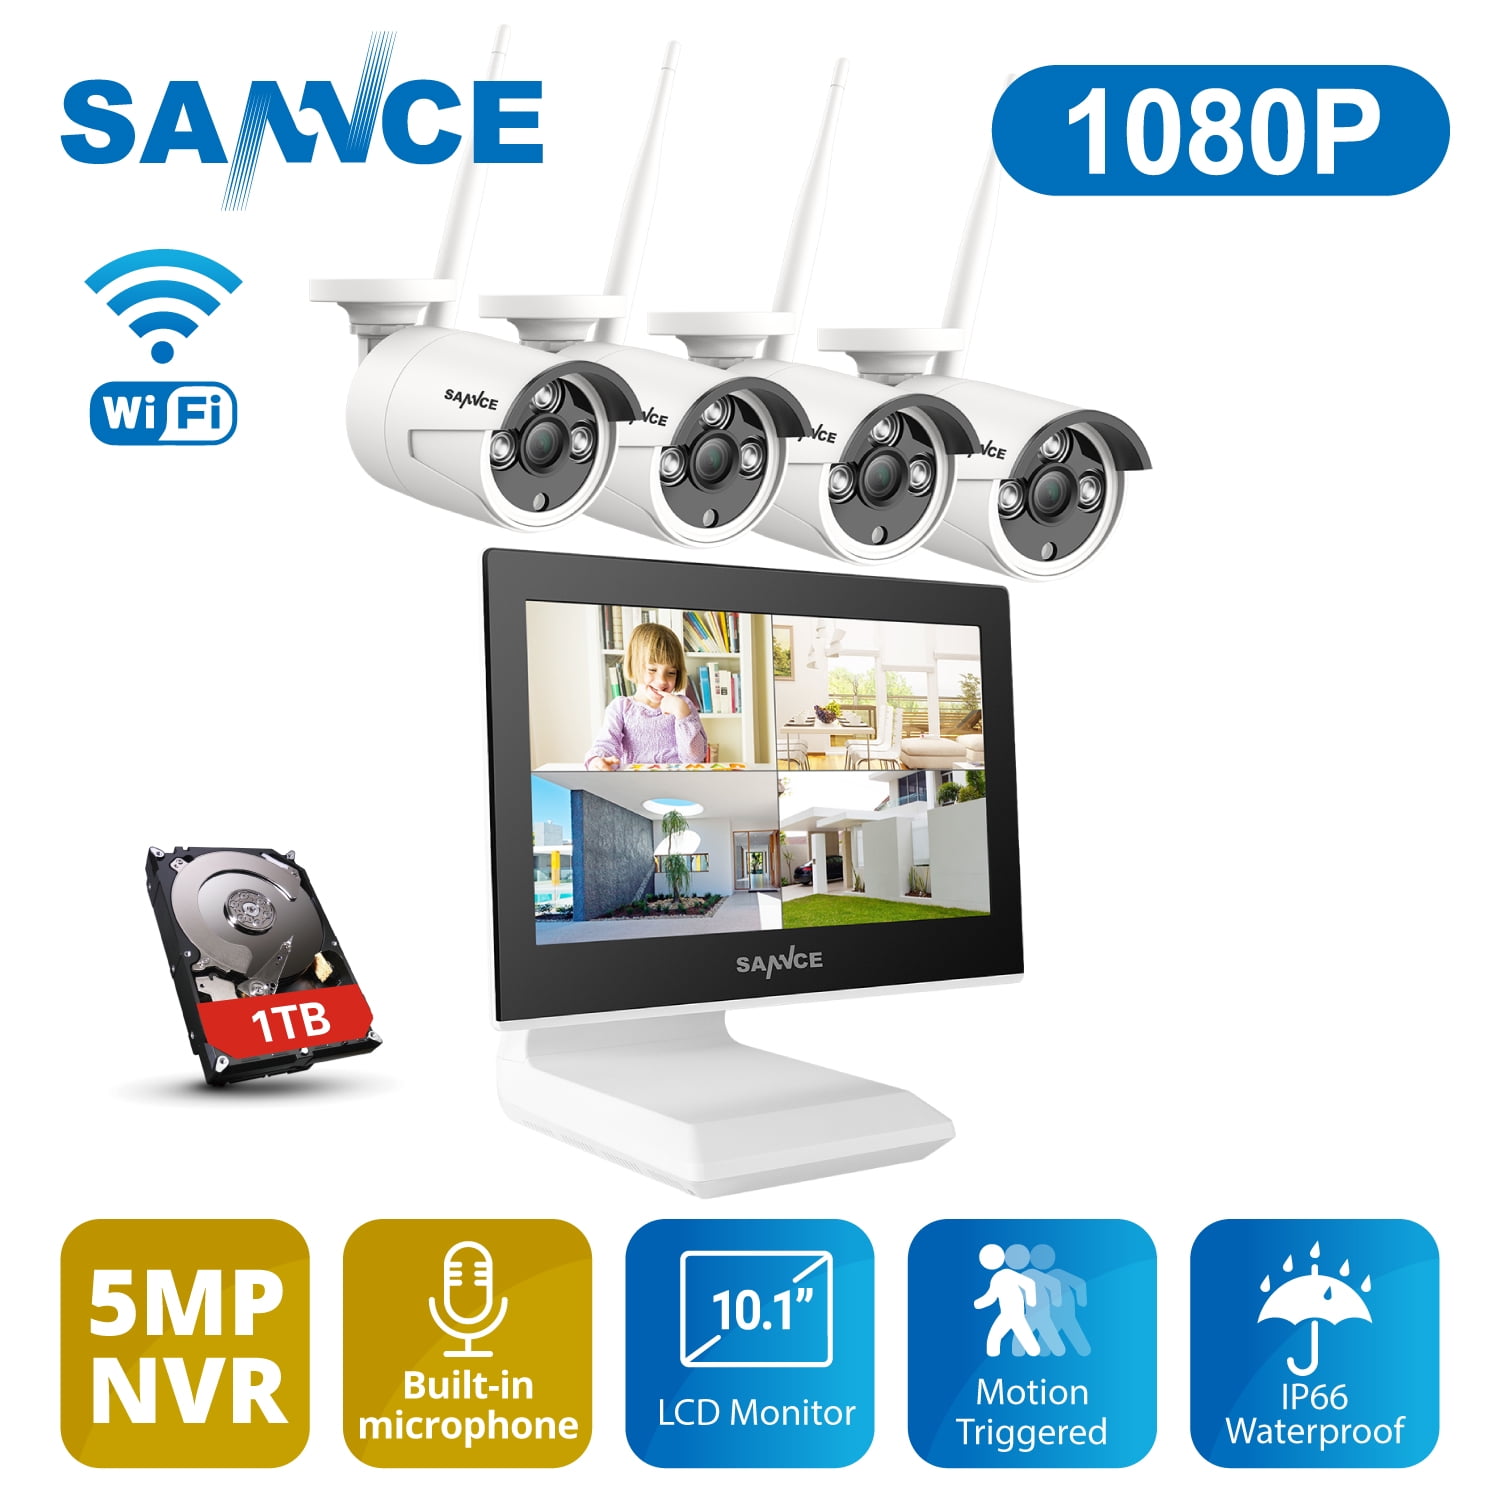 Home Wall Video Monitor 12.5'' Inch Screen For Surveillance HD LCD Display 